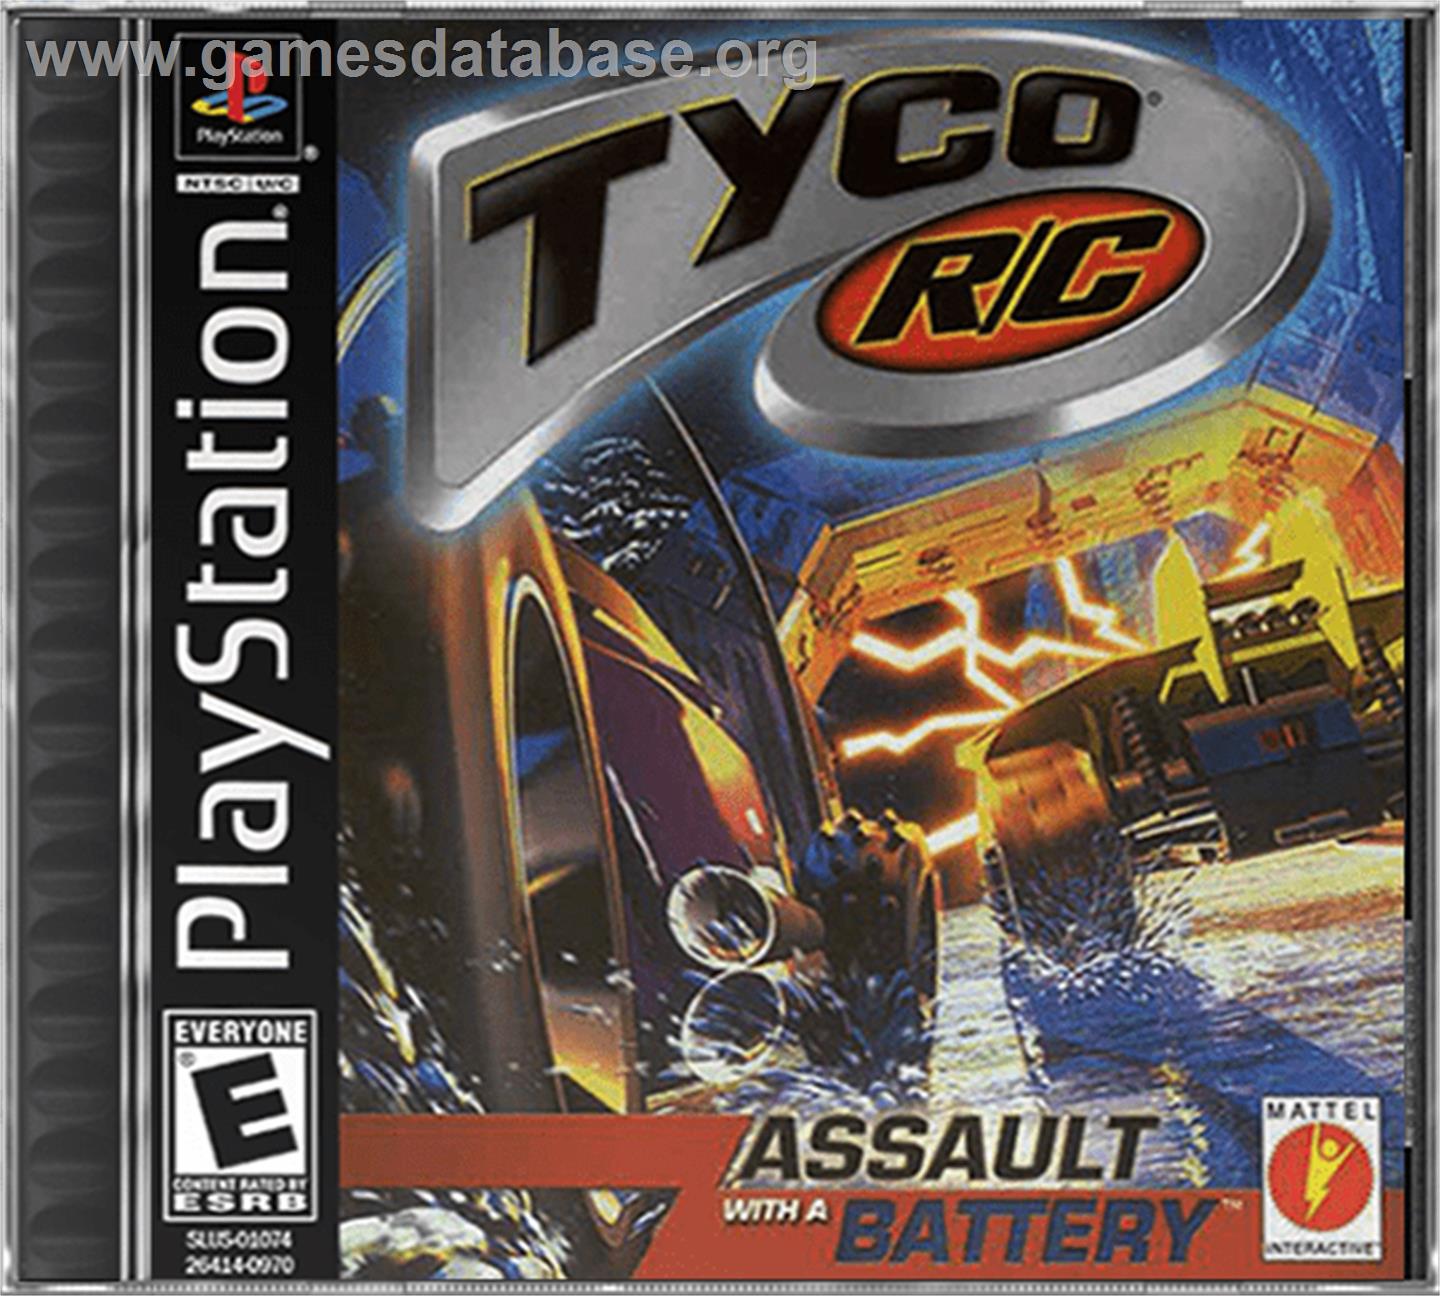 Tyco R/C: Assault with a Battery - Sony Playstation - Artwork - Box